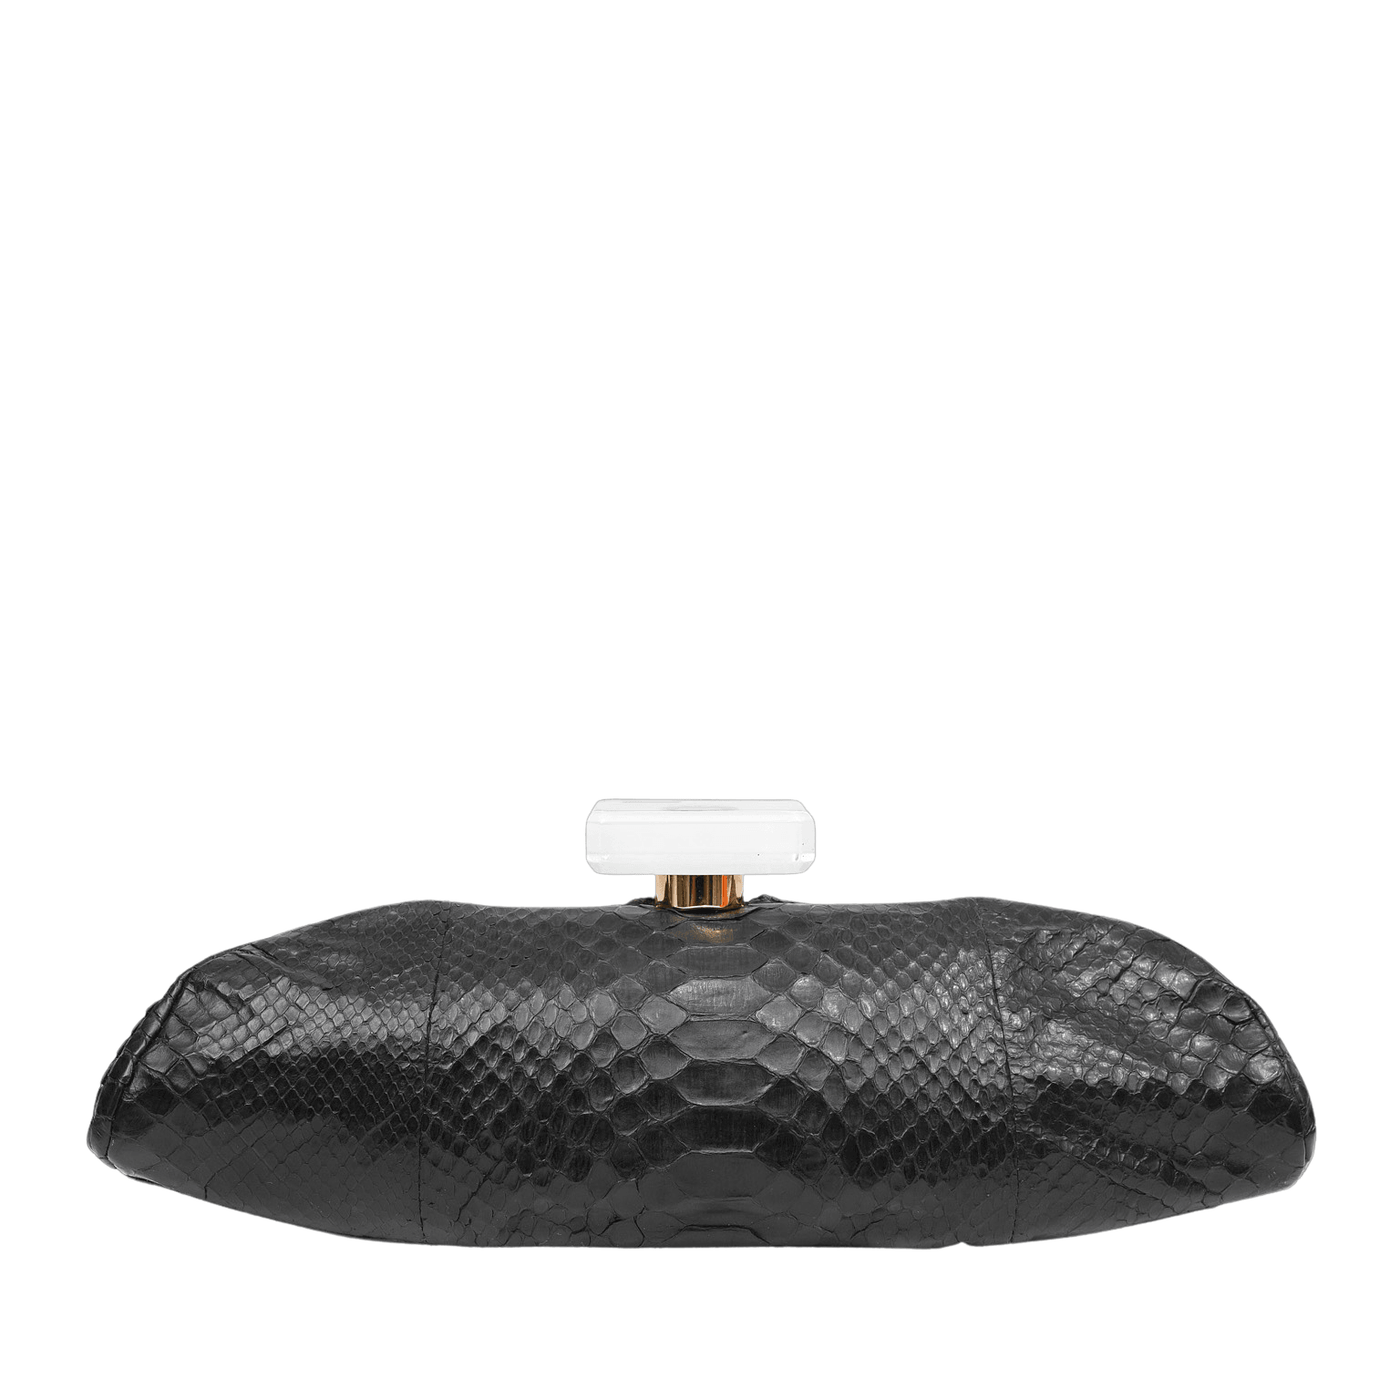 Chanel Python Clutch w/ Cast Resin Top – Only Authentics